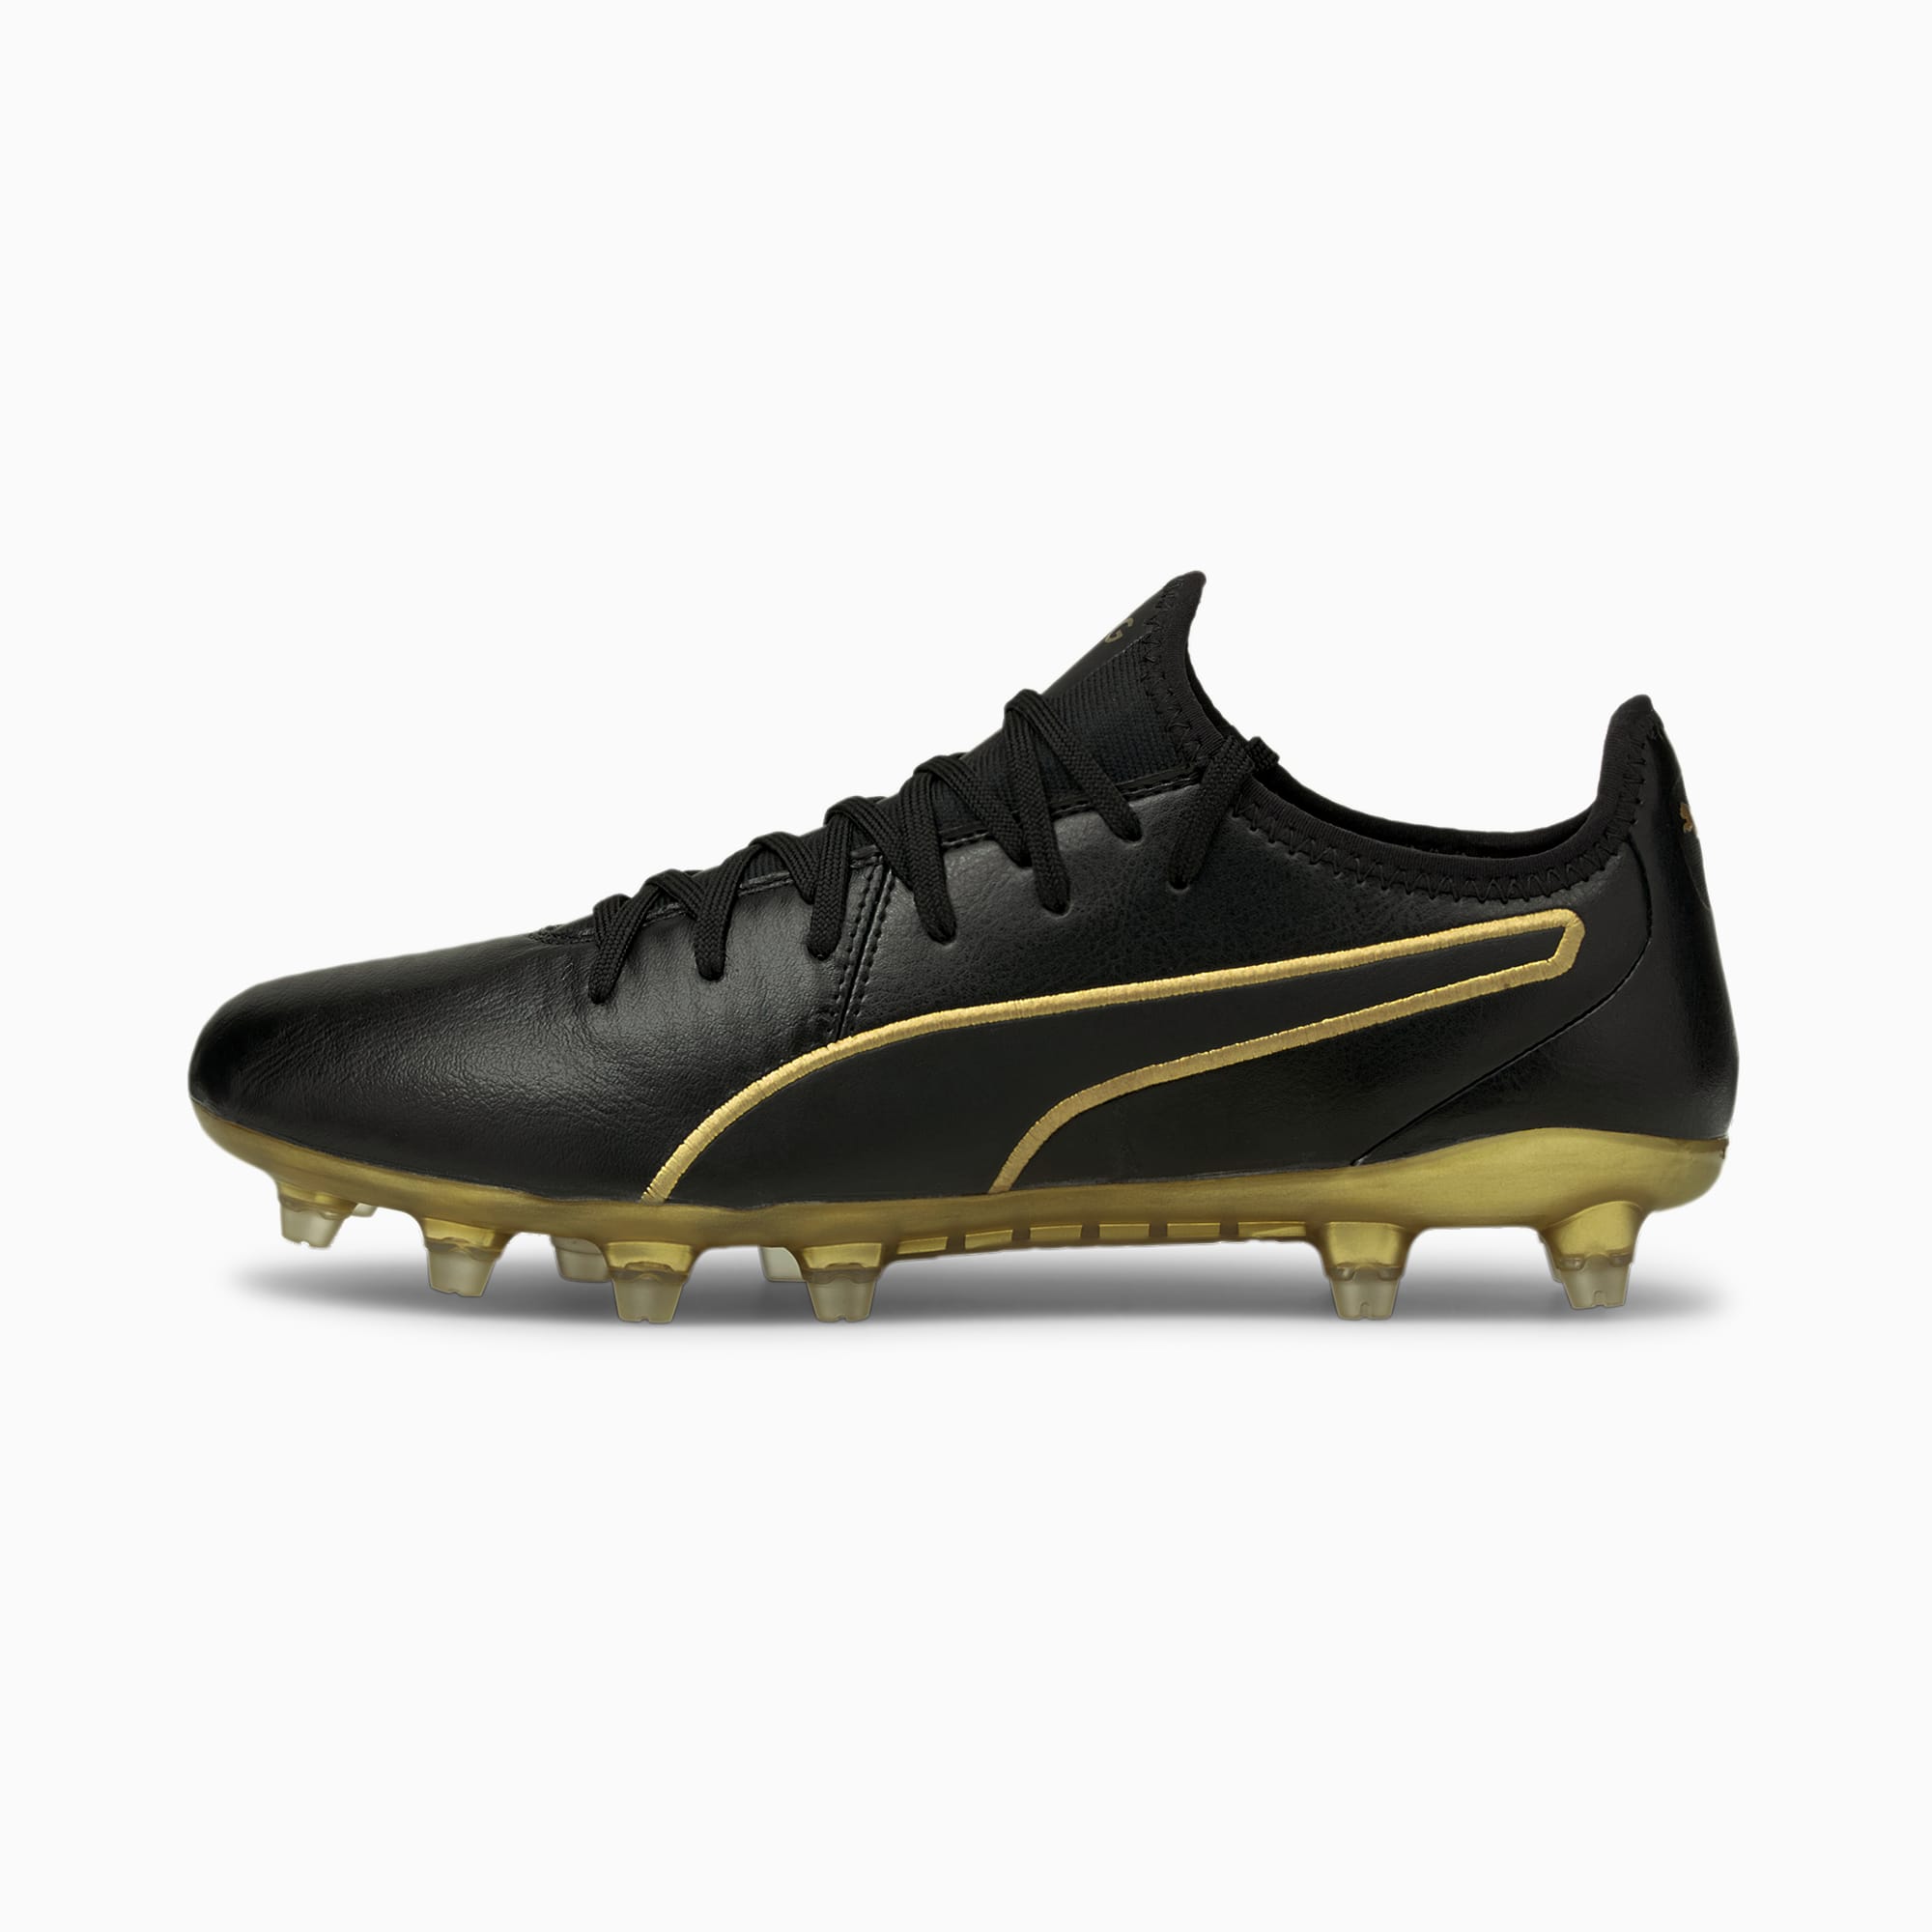 PUMA Chaussure de foot KING Pro FG, Noir/Or, Taille 41, Chaussures